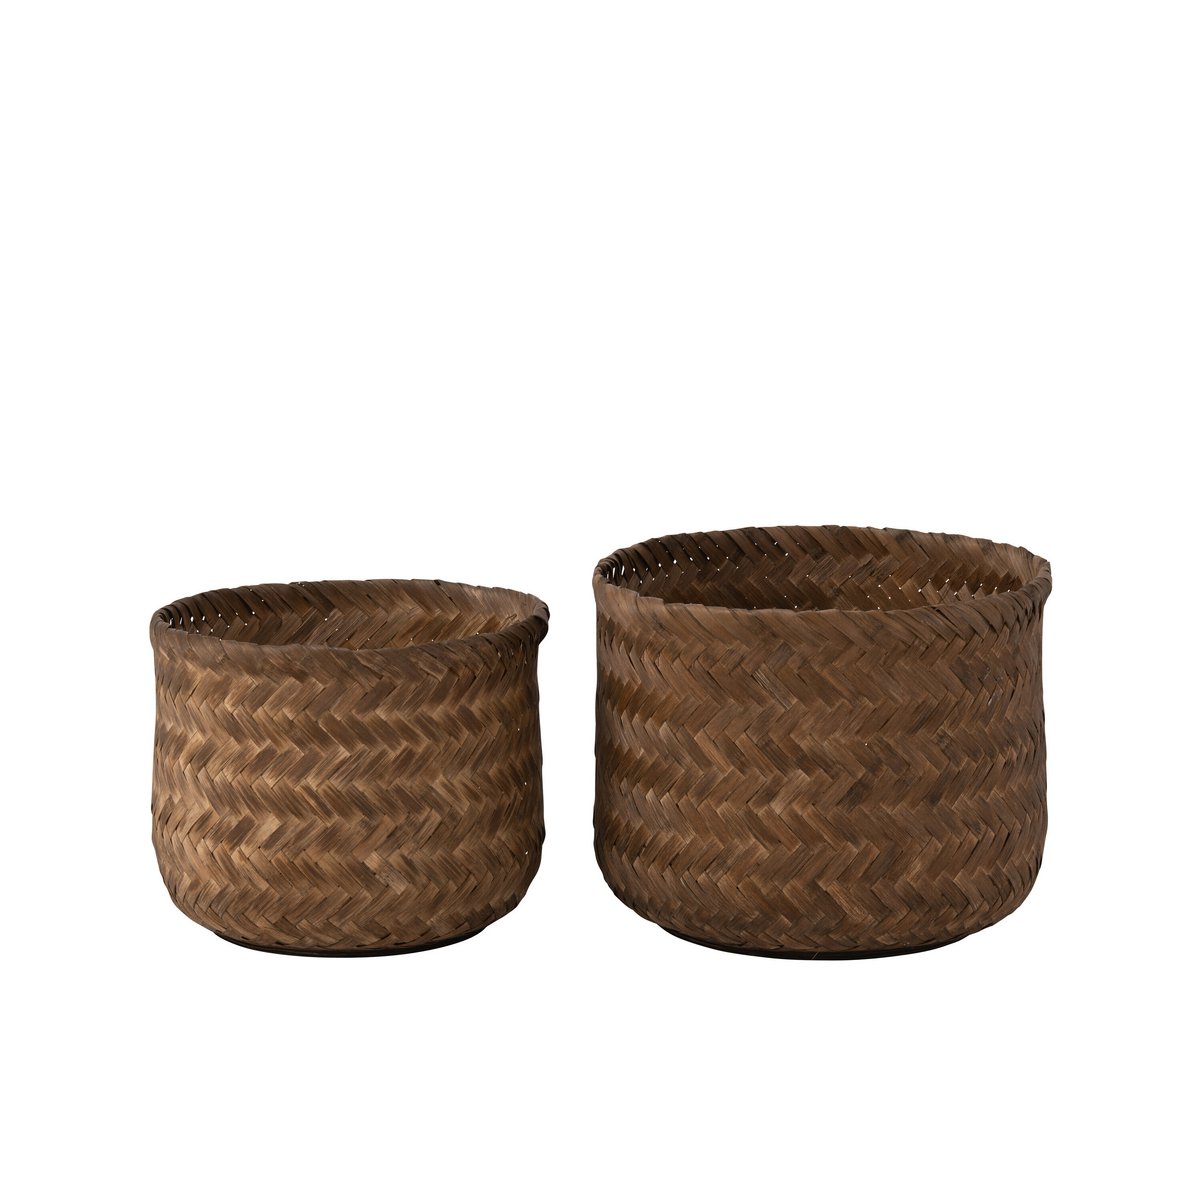 Simple baskets in a set of 2 made of bamboo - dark brown